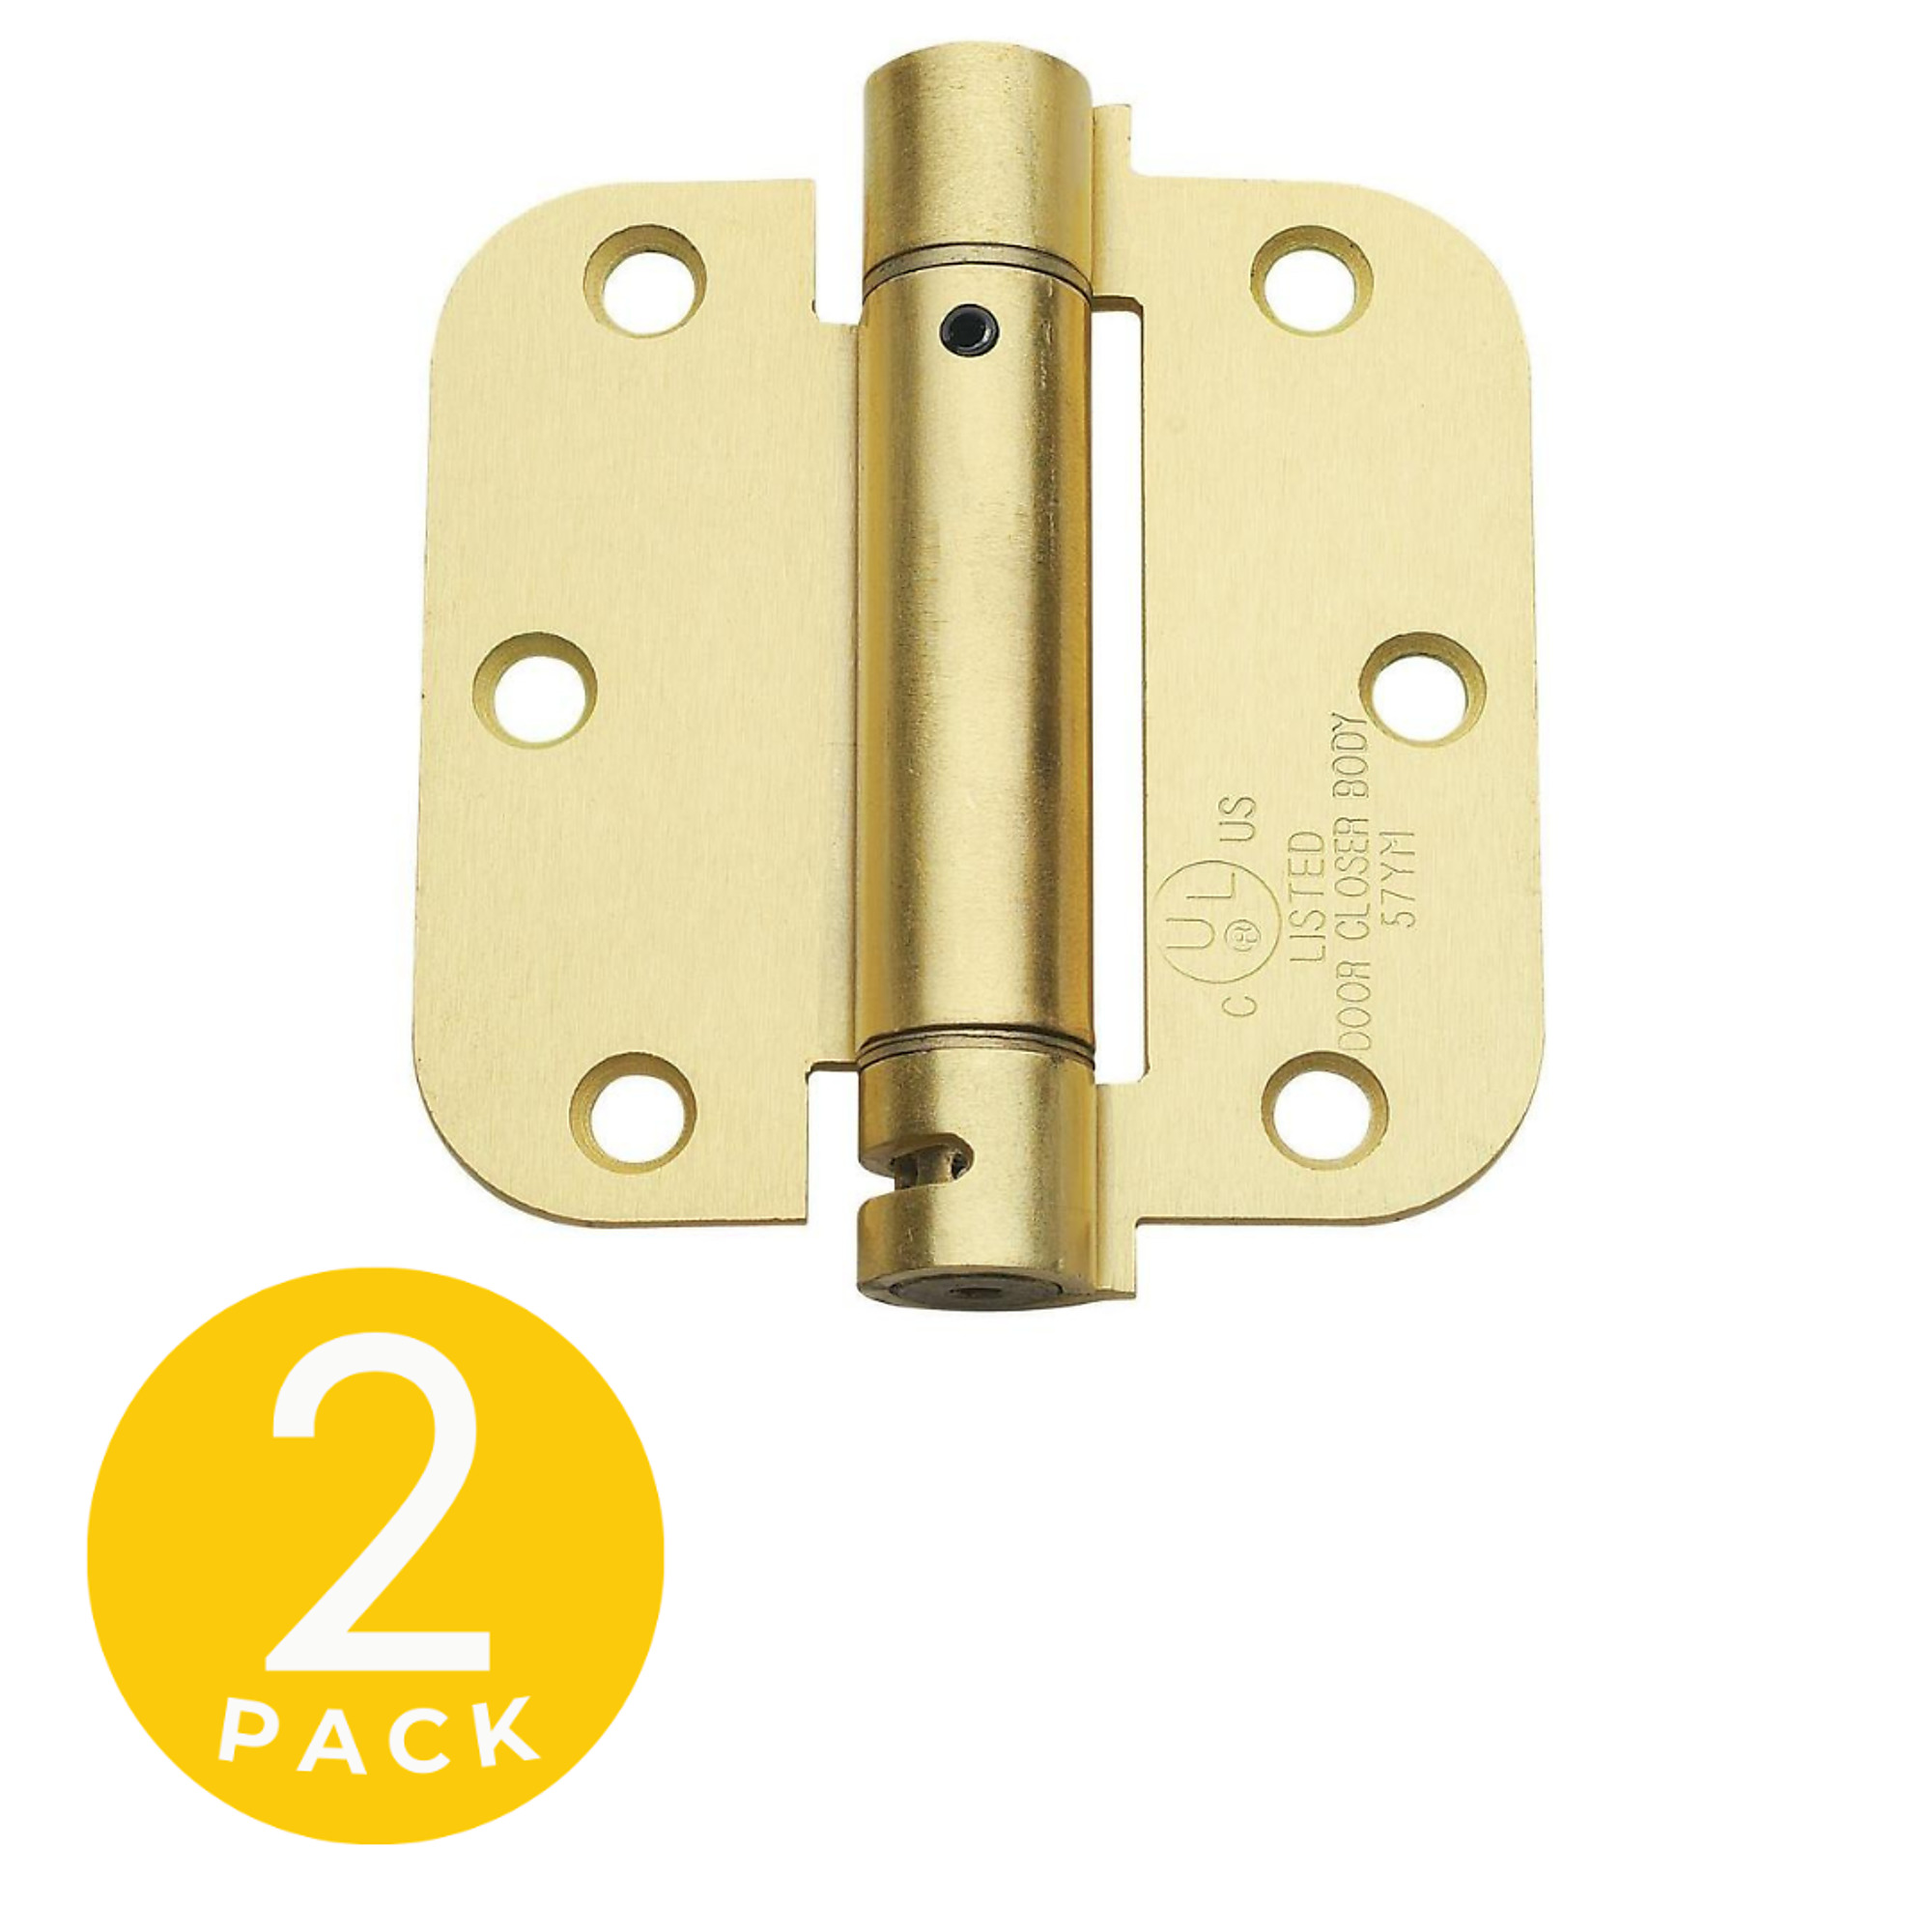 CPS3535 Series Commercial Full Mortise Spring Hinge — 2-Pk, Satin Brass, 3.5Inch x 3.5Inch, Model - Global Door Controls CPS3535-R-US4-M